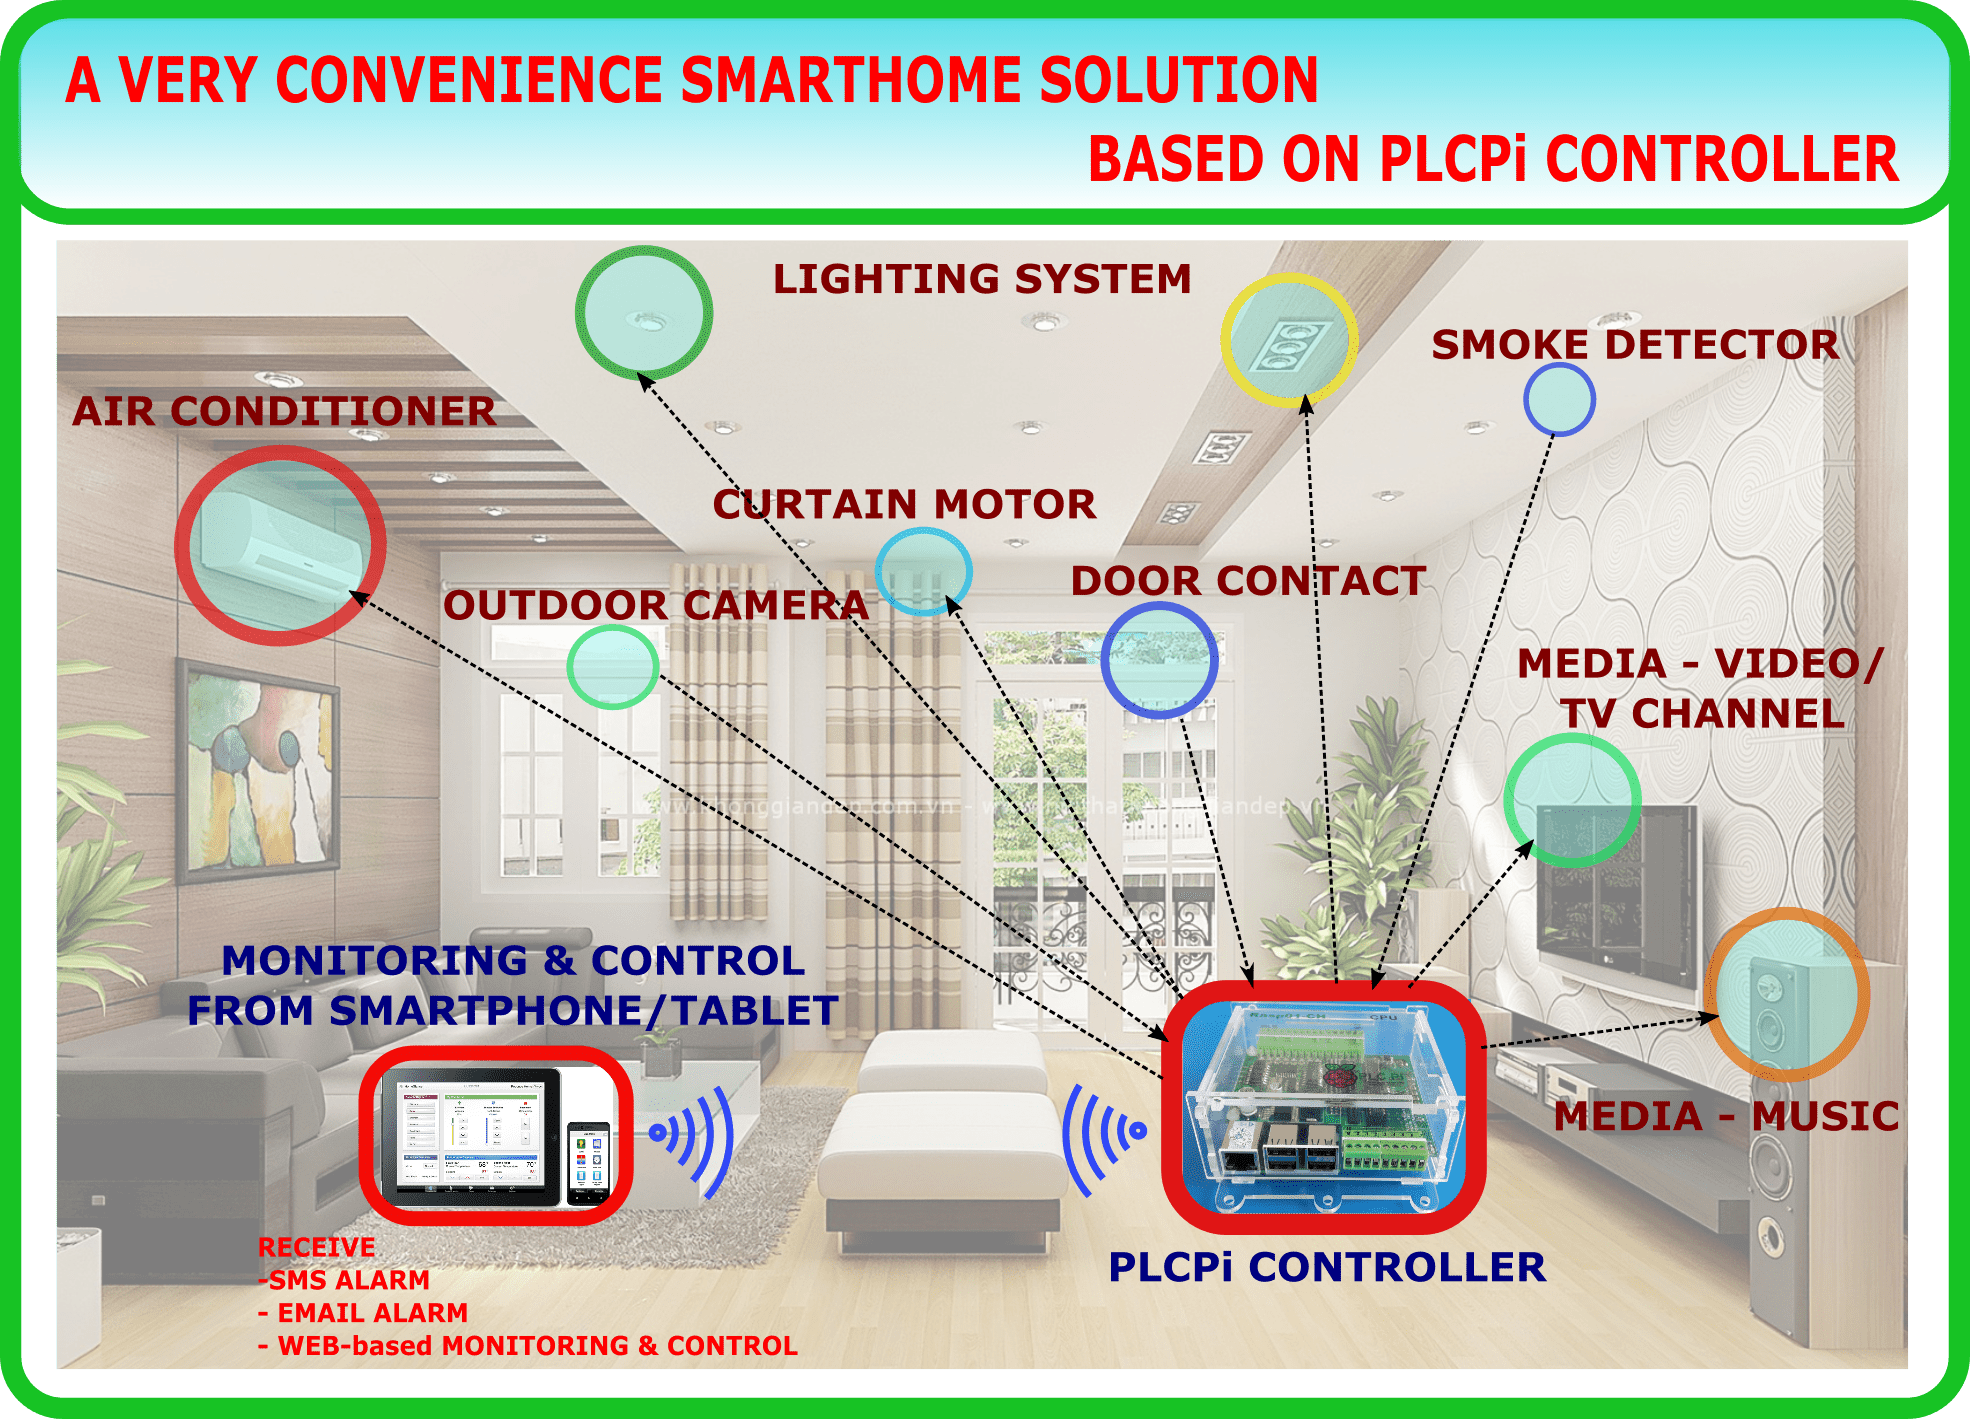 SOLUTION FOR SMARTHOME